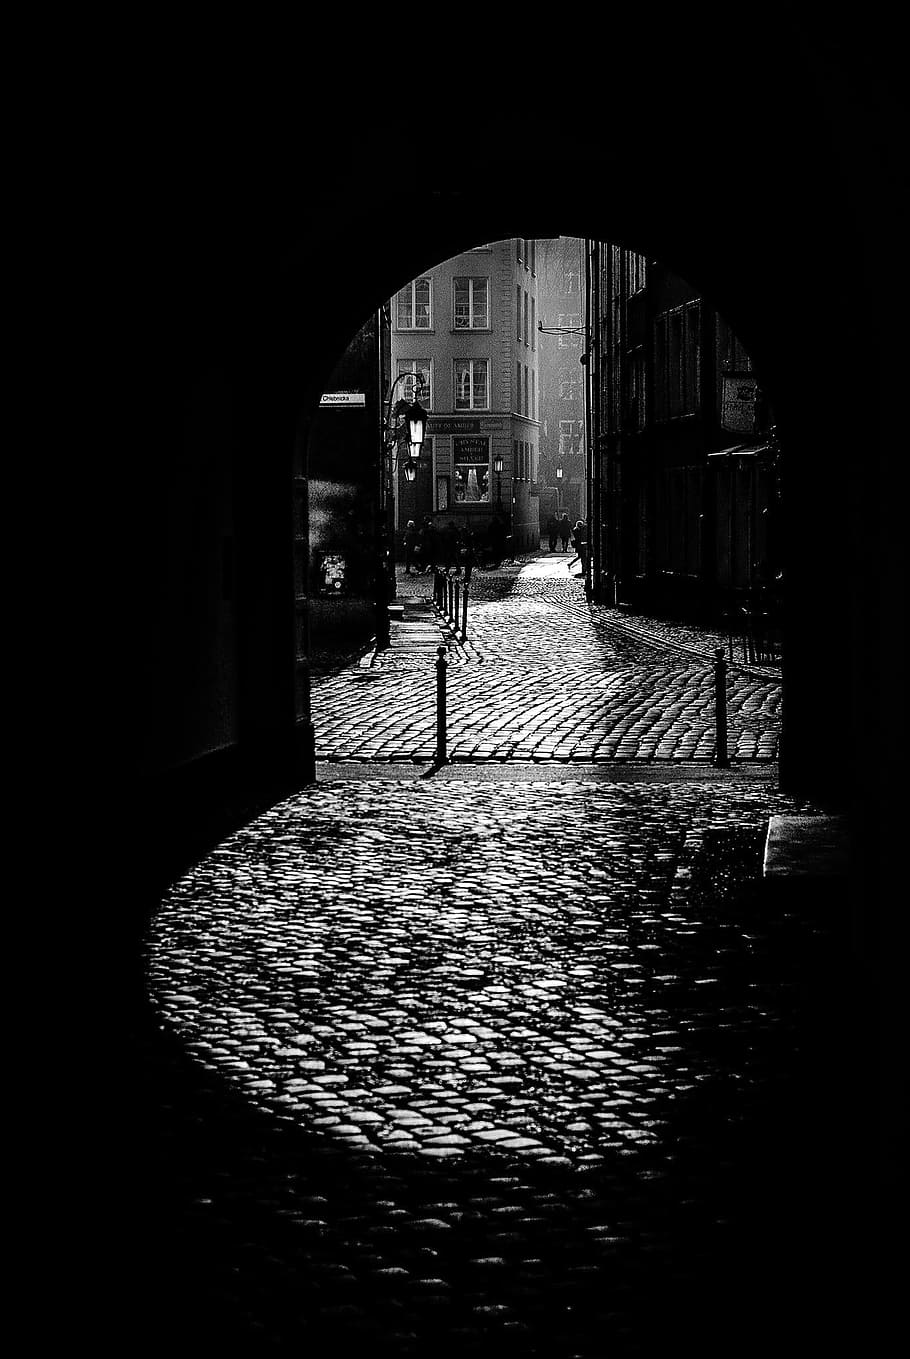 silhouette of tunnel, black and white, dark alley, the old town, pavement, monument, architecture, old buildings, dark street, poland